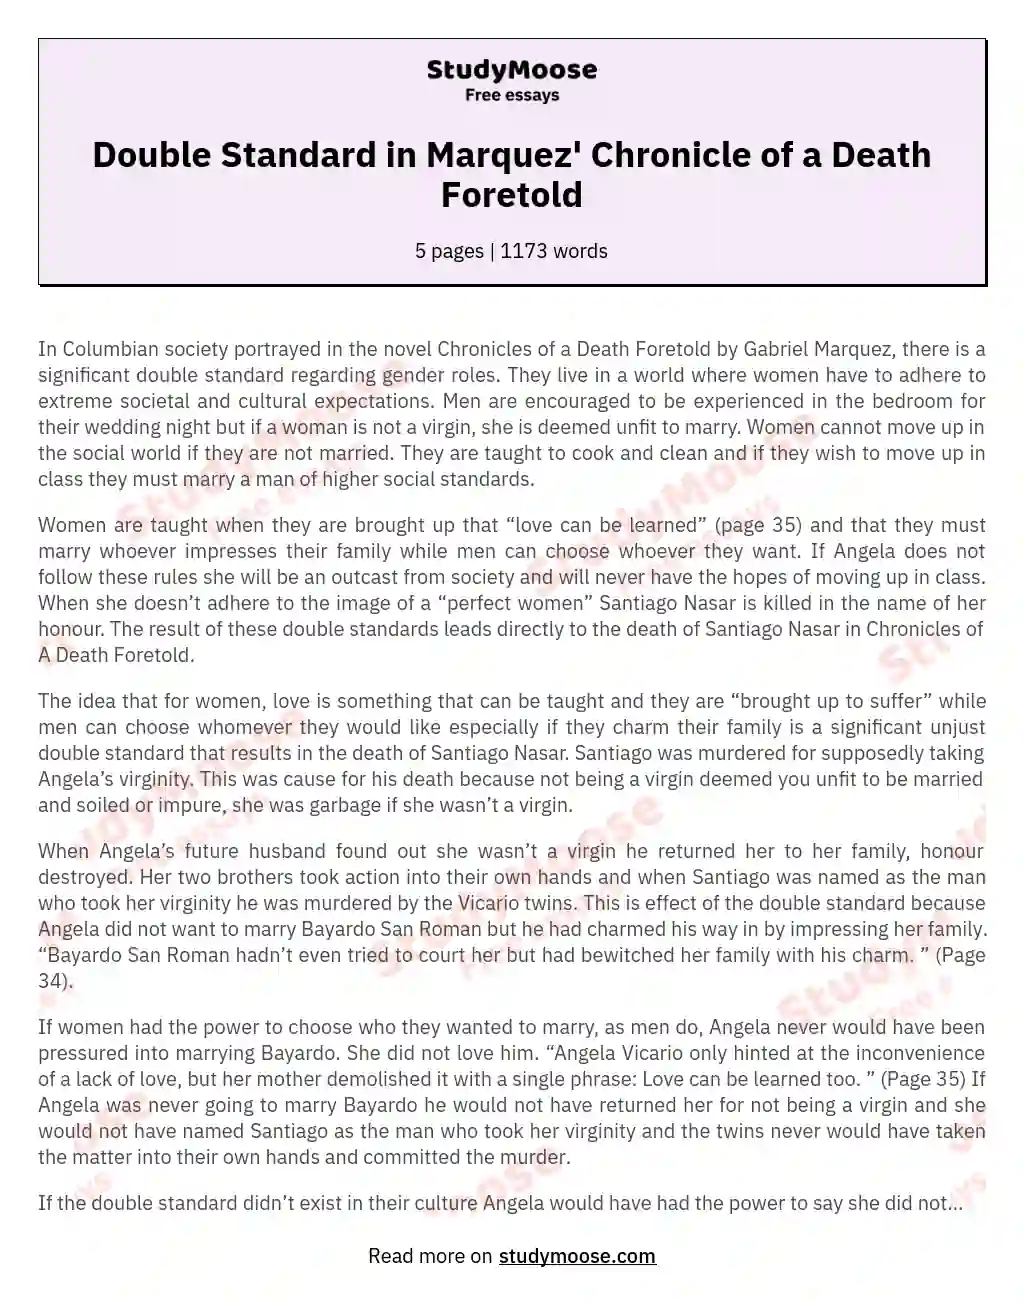 Unjust Double Standards in Chronicles of a Death Foretold essay